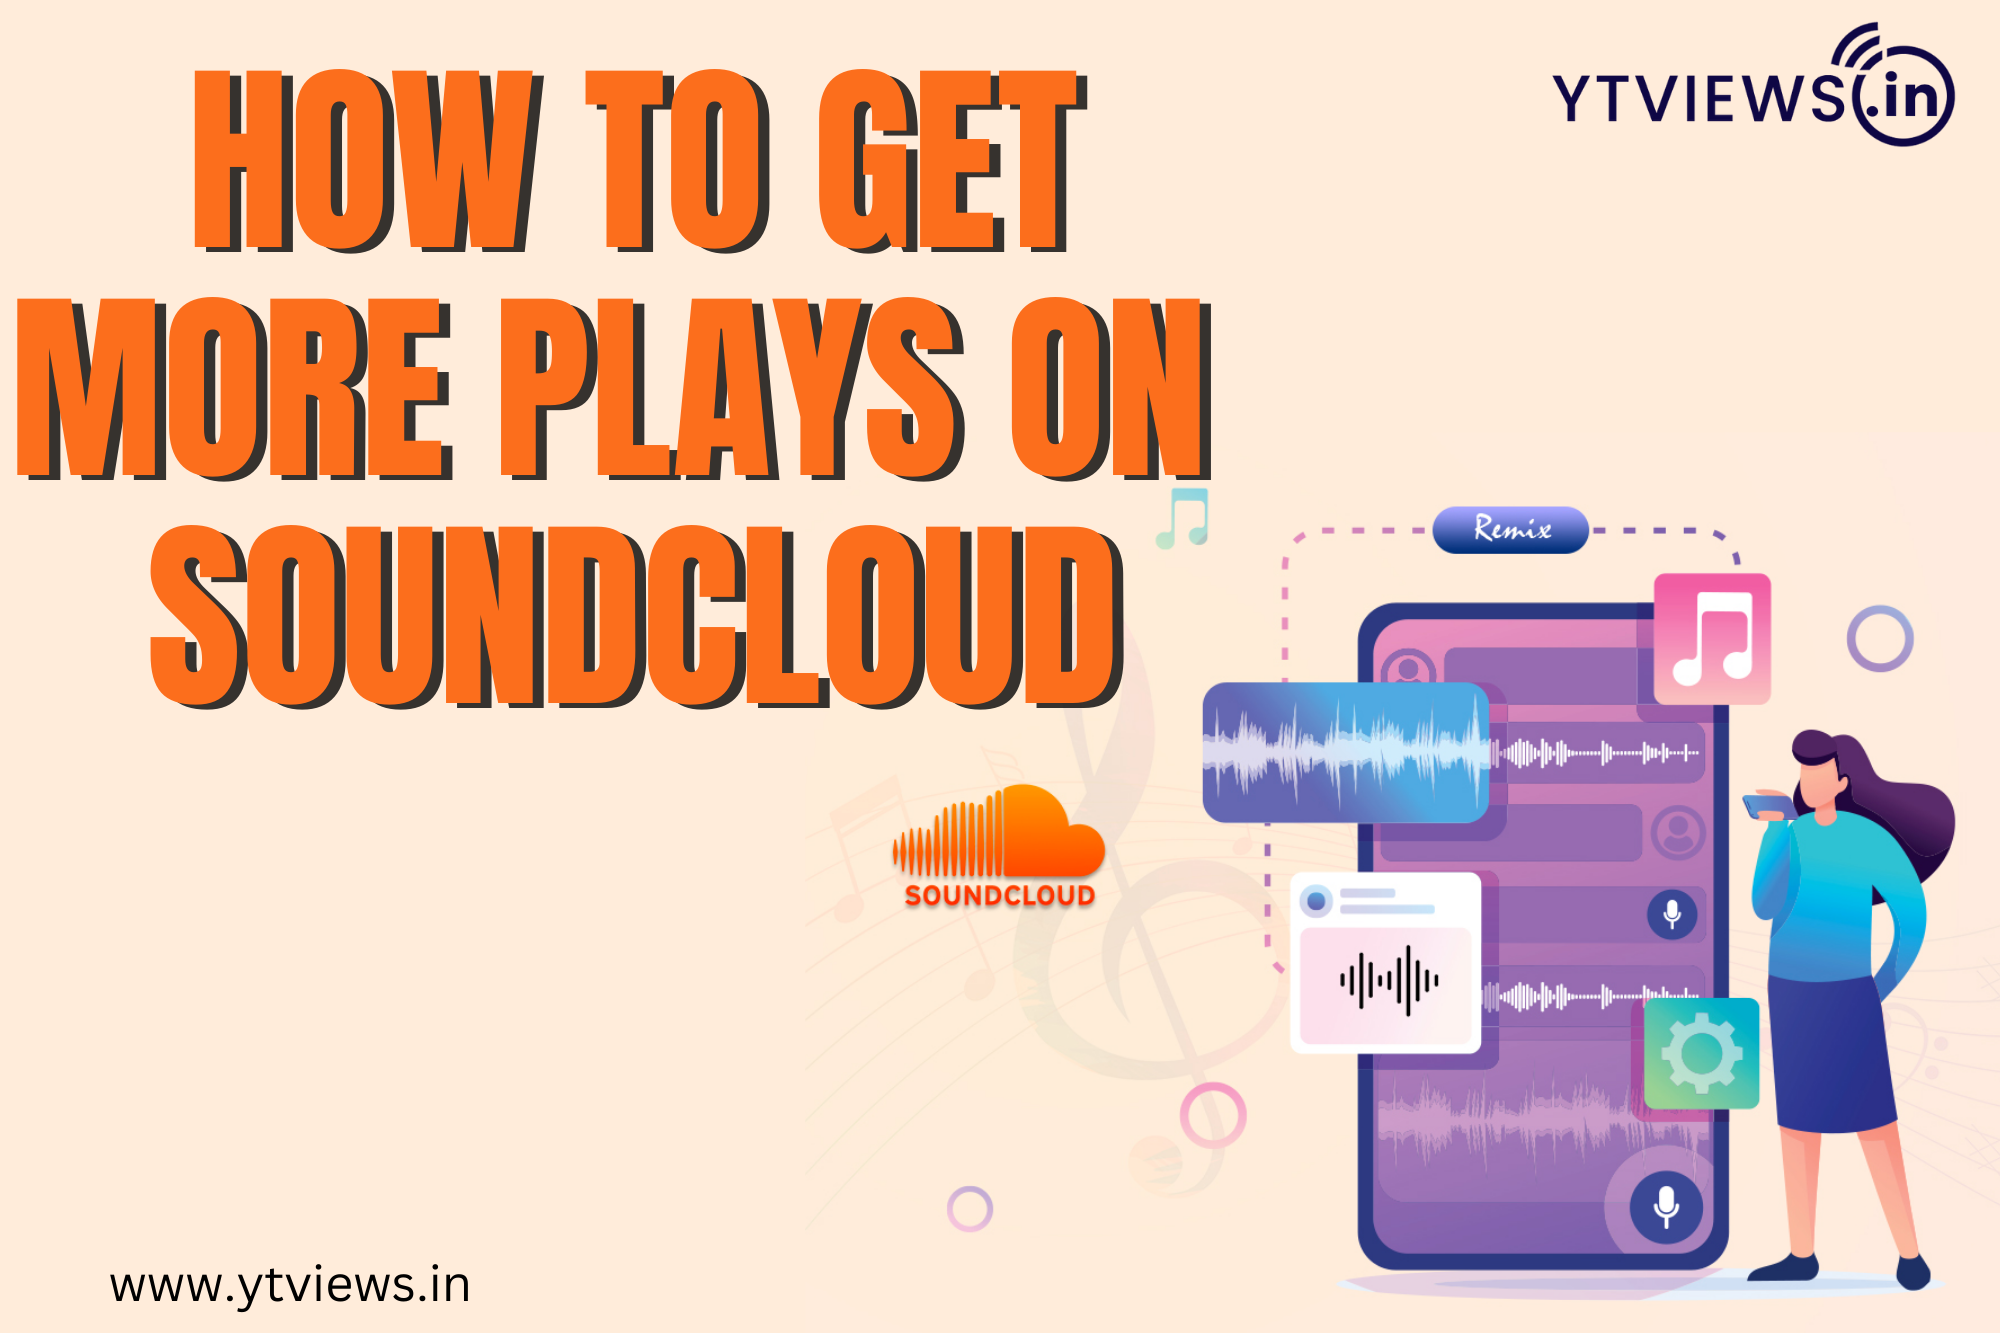 How to get more plays on SoundCloud